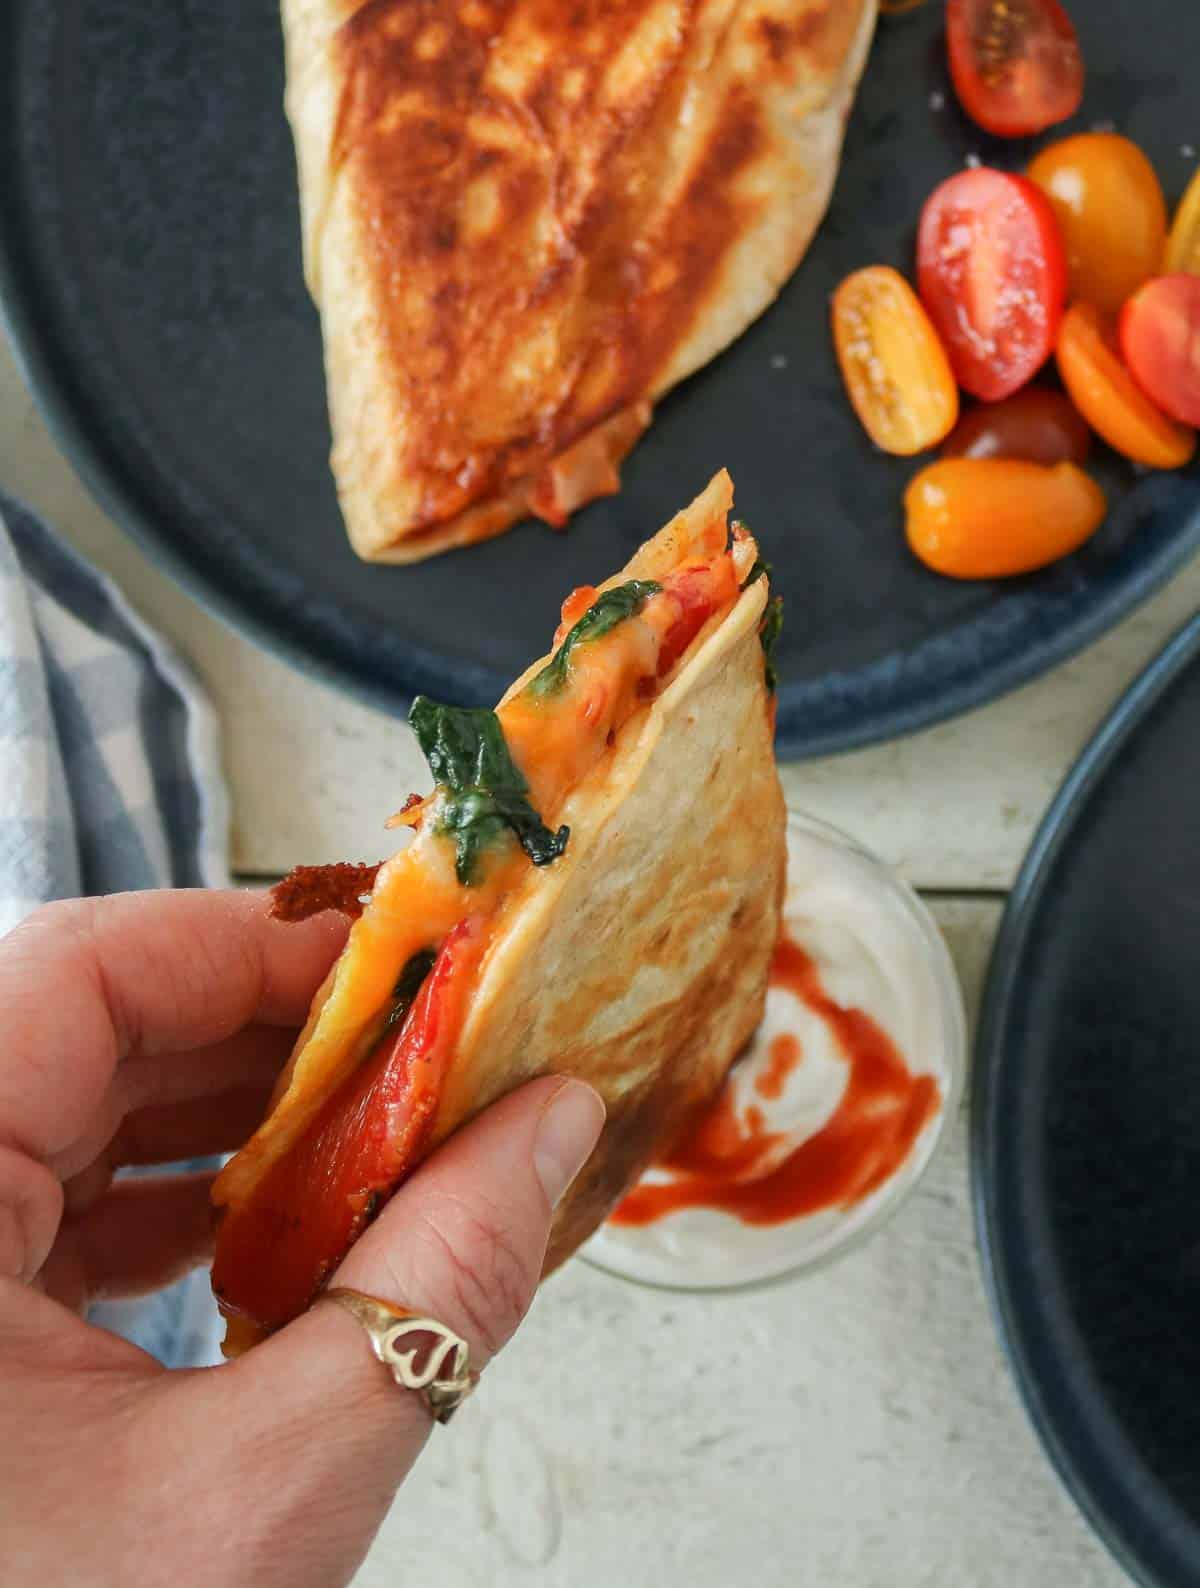 Hand dipping a veggie and egg quesadilla into a small dish of yogurt with hot sauce.